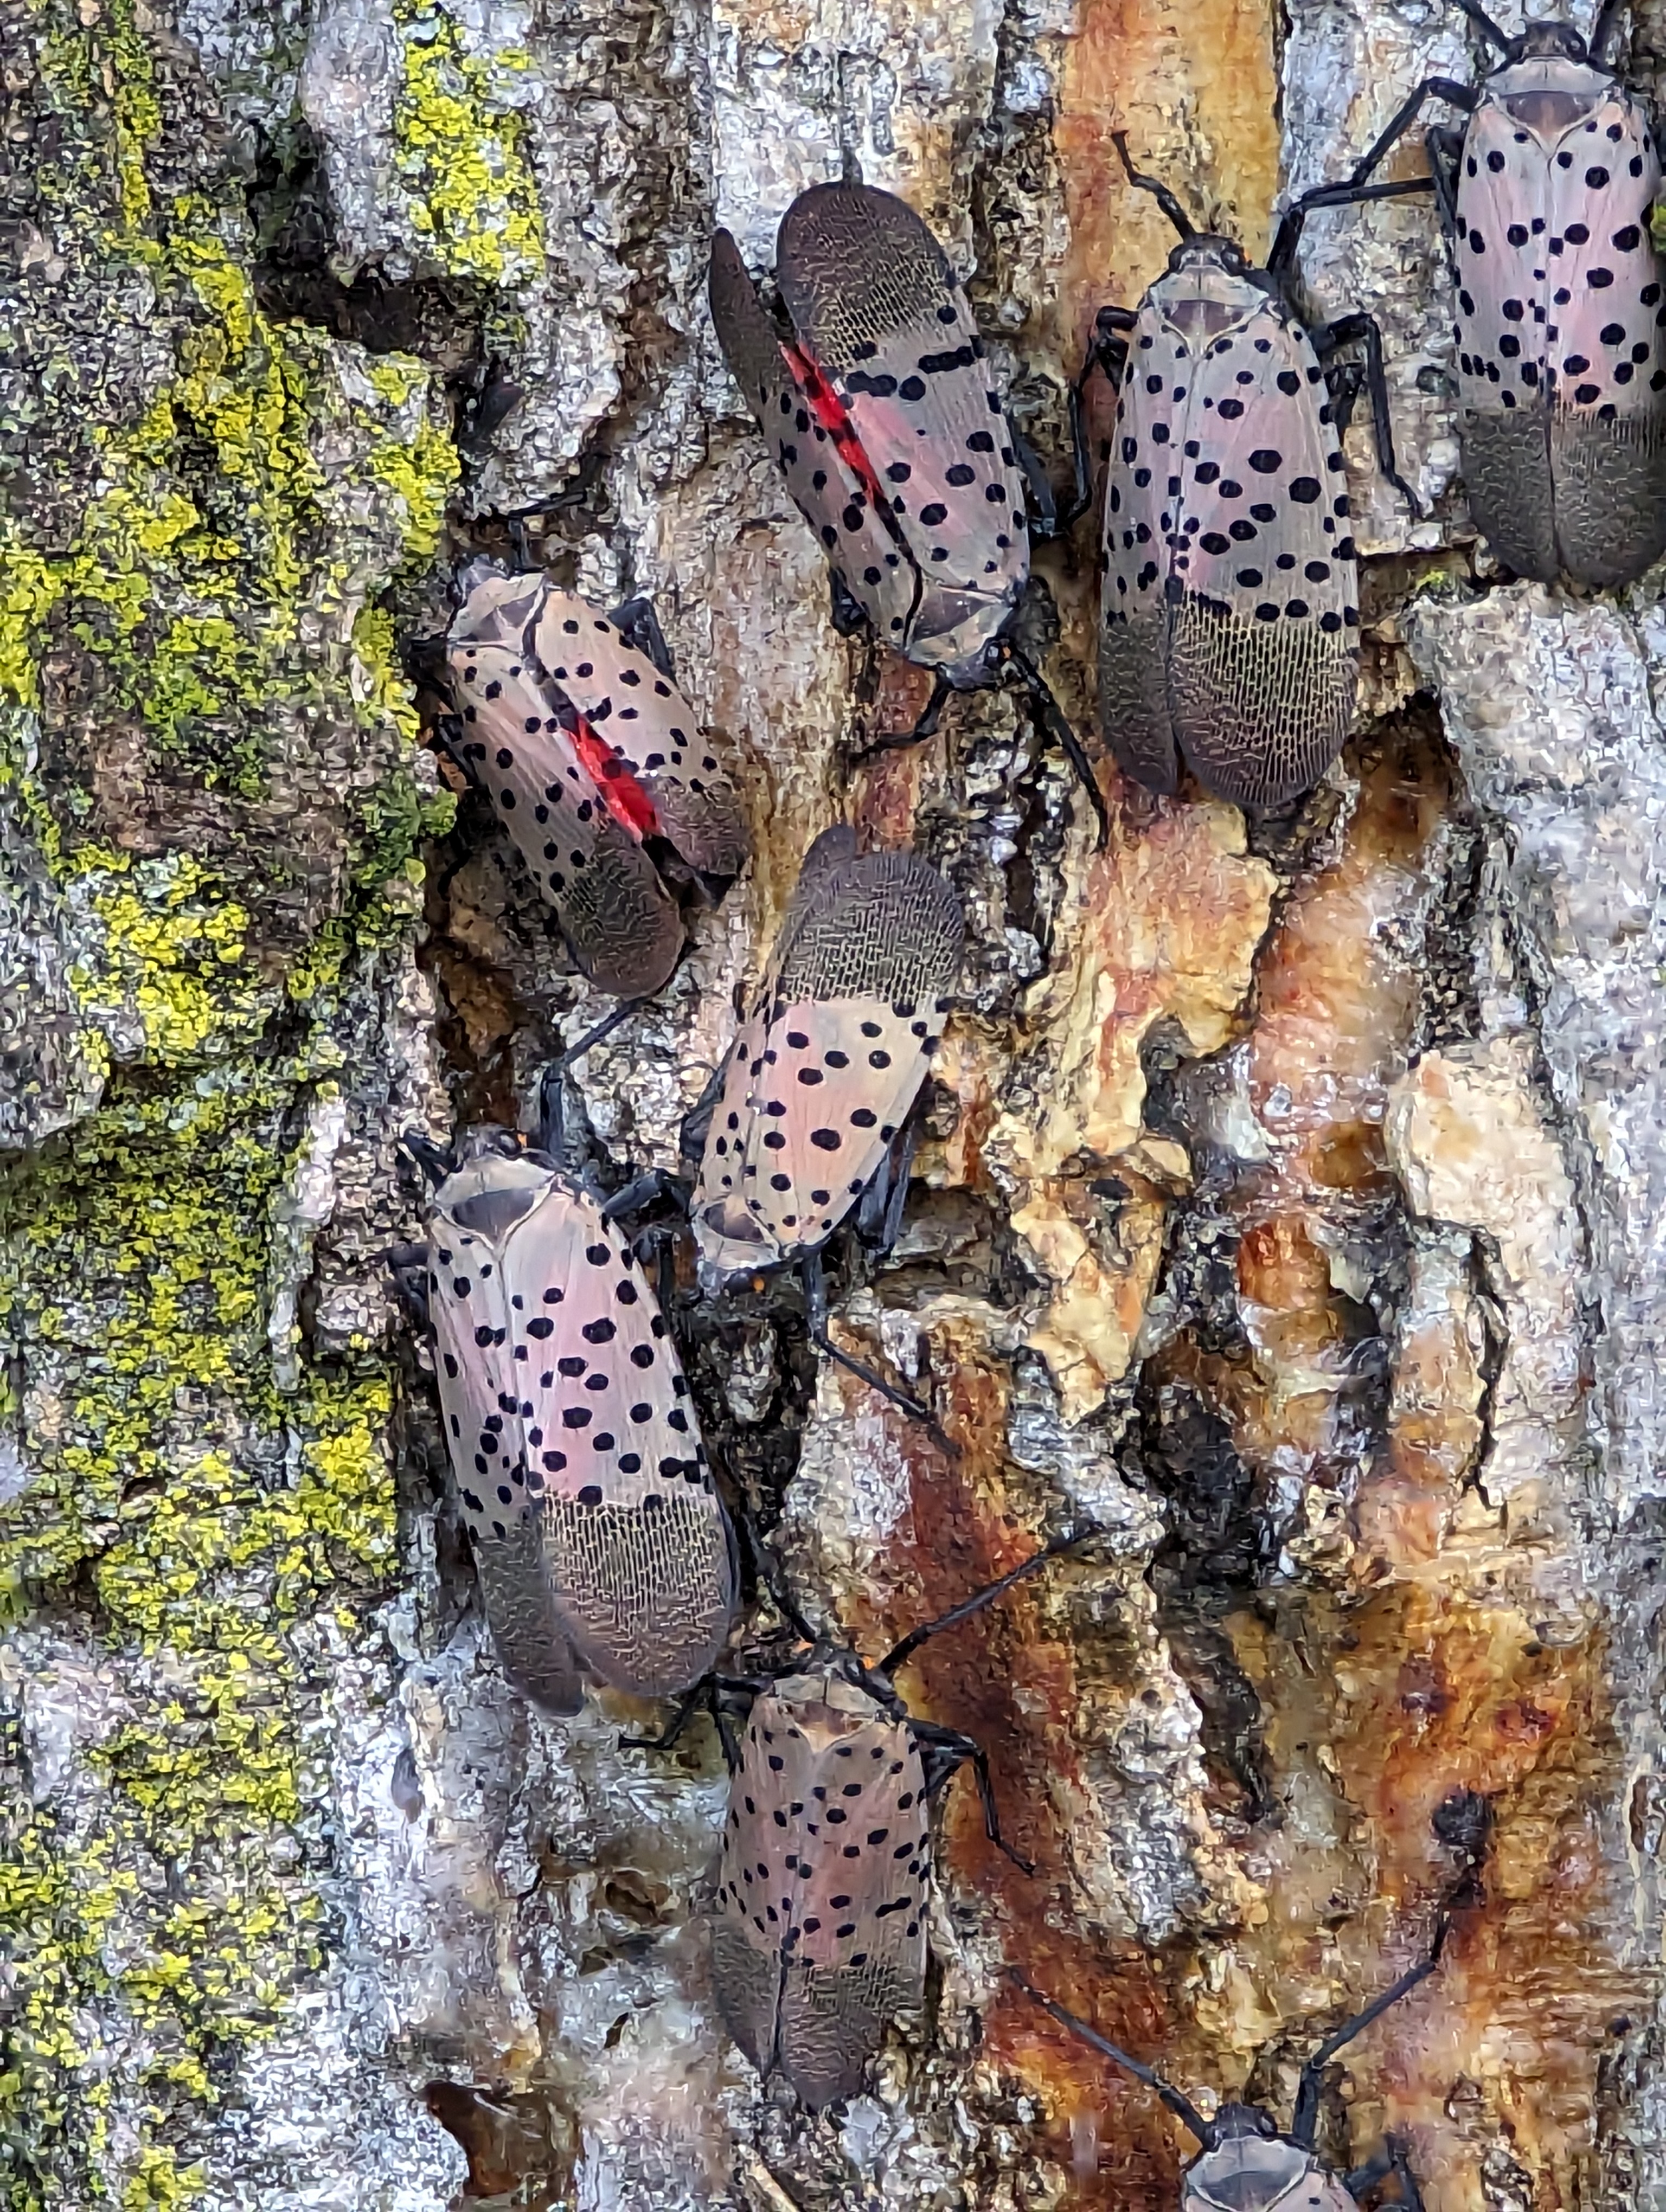 Spotted lanternfly adults congregating on a tree.